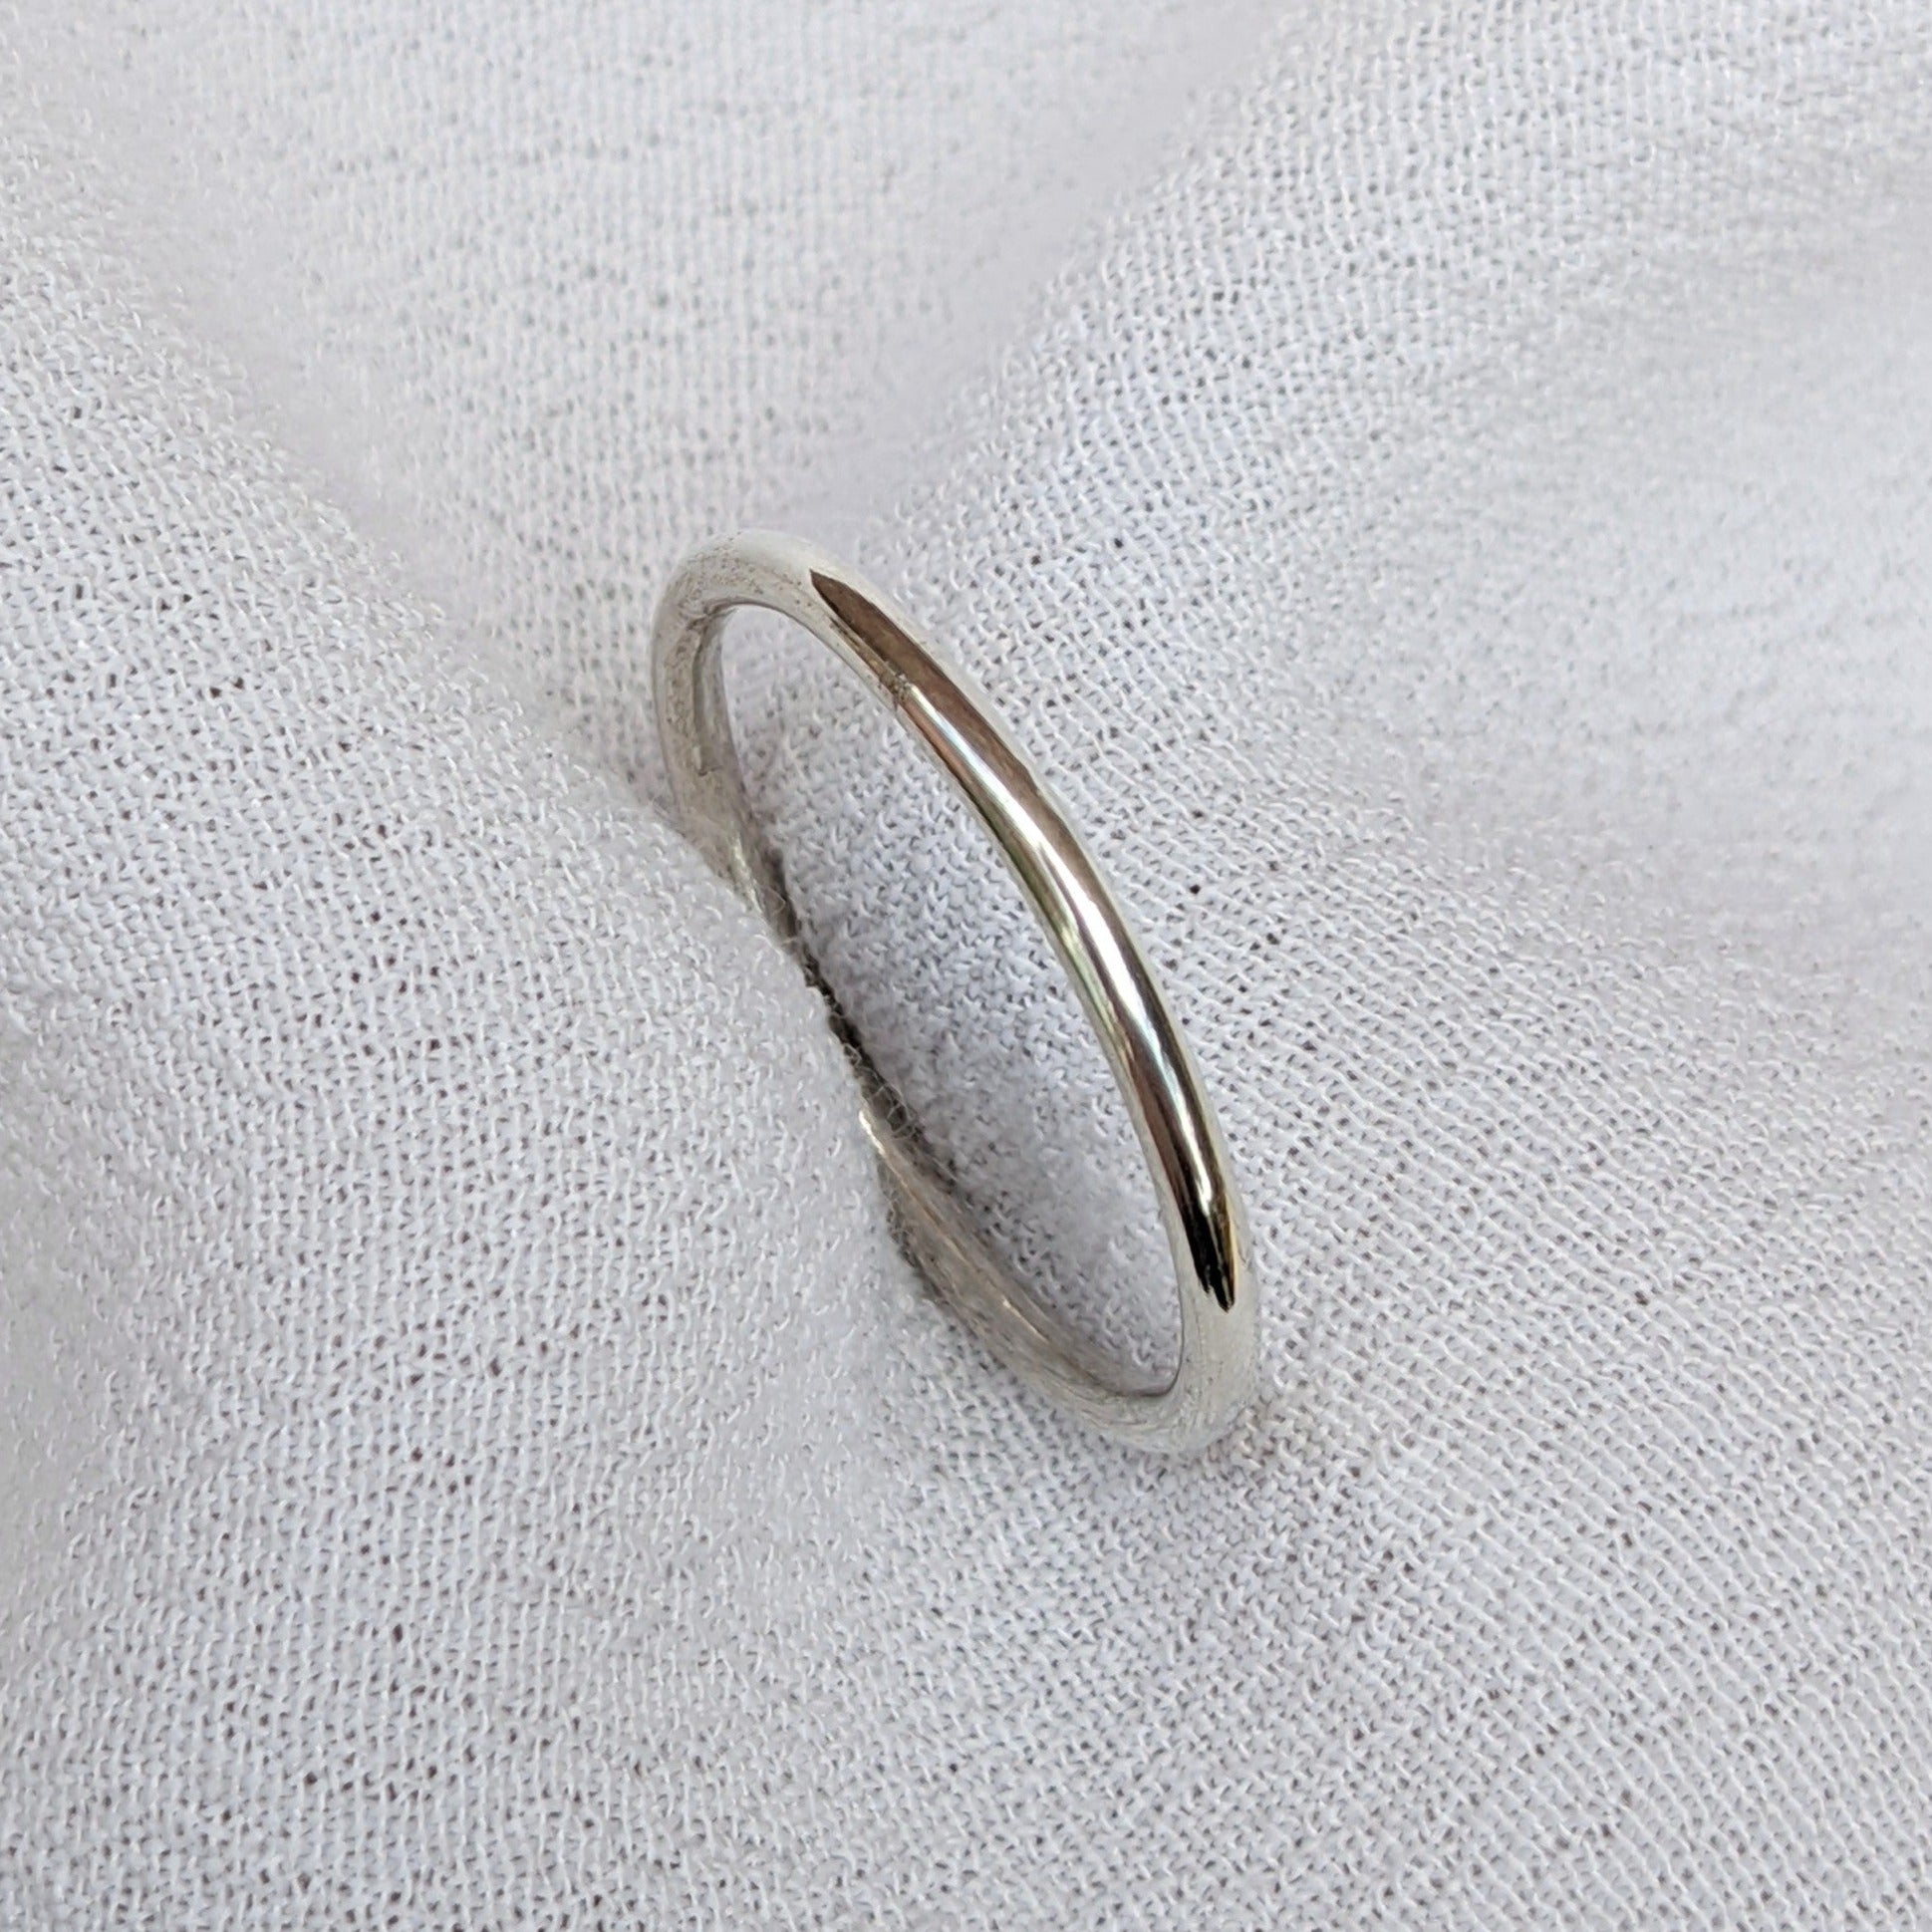 Slim silver ring held in white fabric